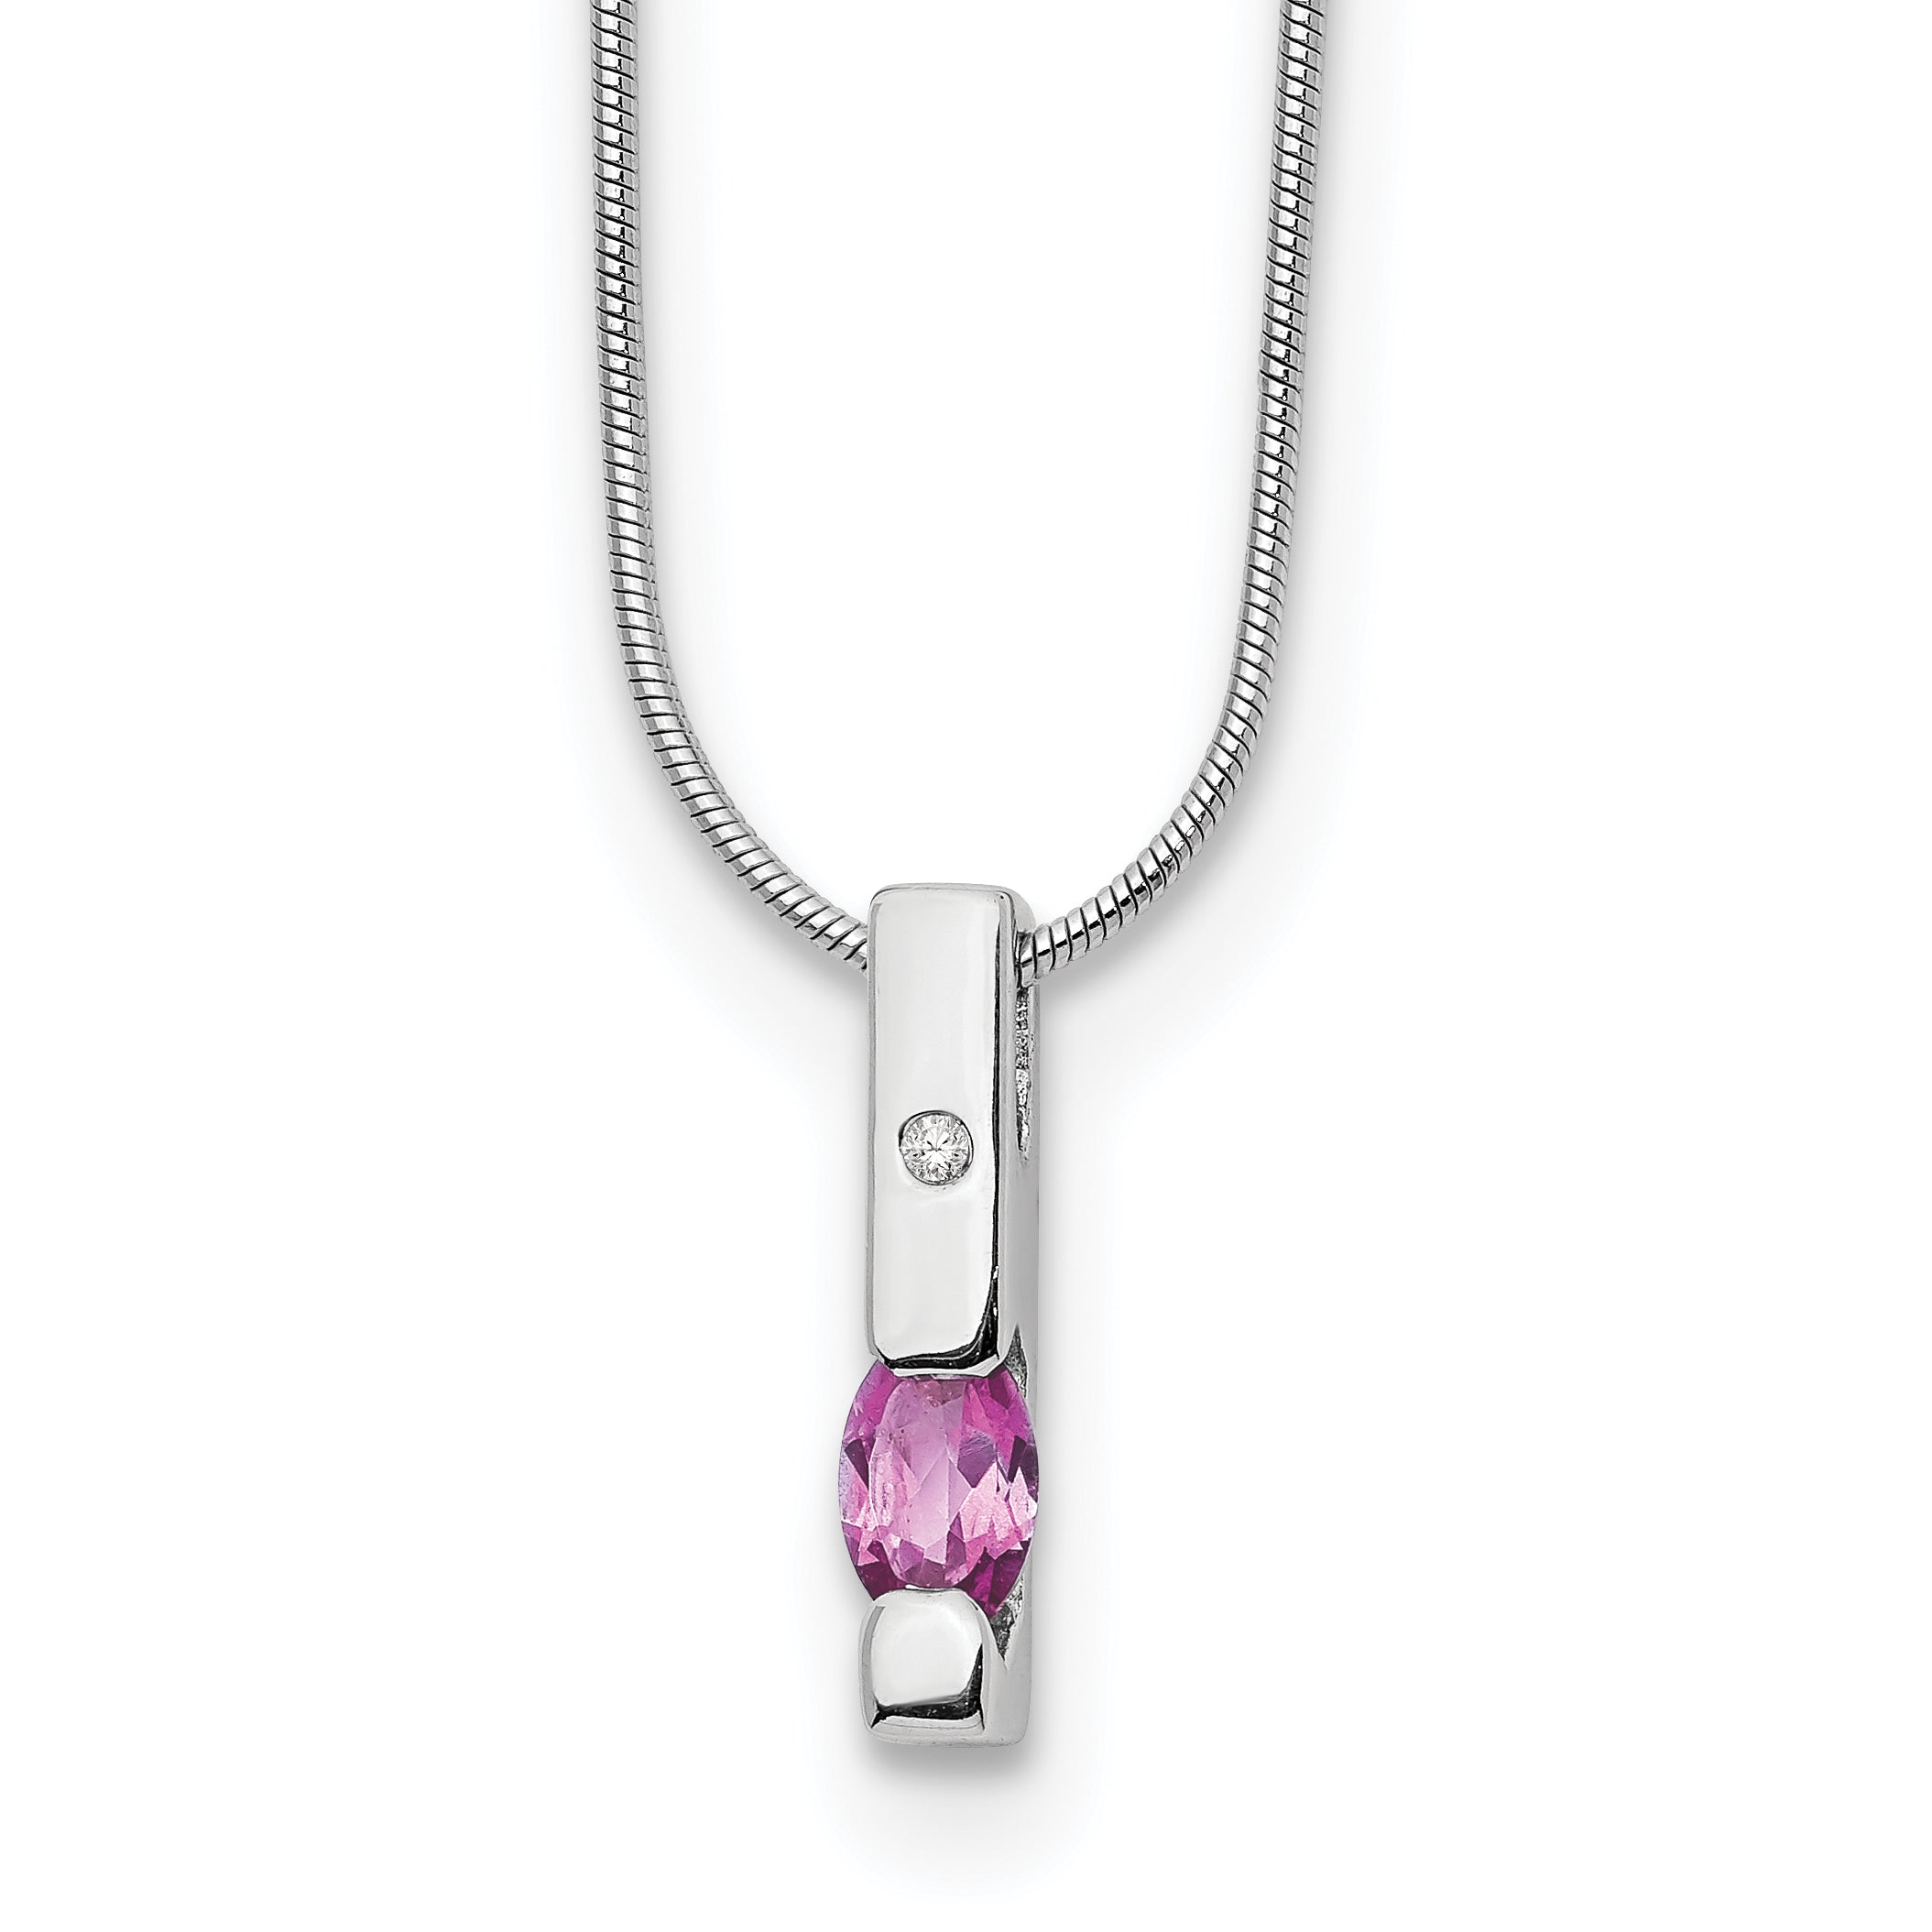 White Ice Sterling Silver Rhodium-plated 18 Inch Diamond and Pink Tourmaline Necklace with 2 Inch Extender